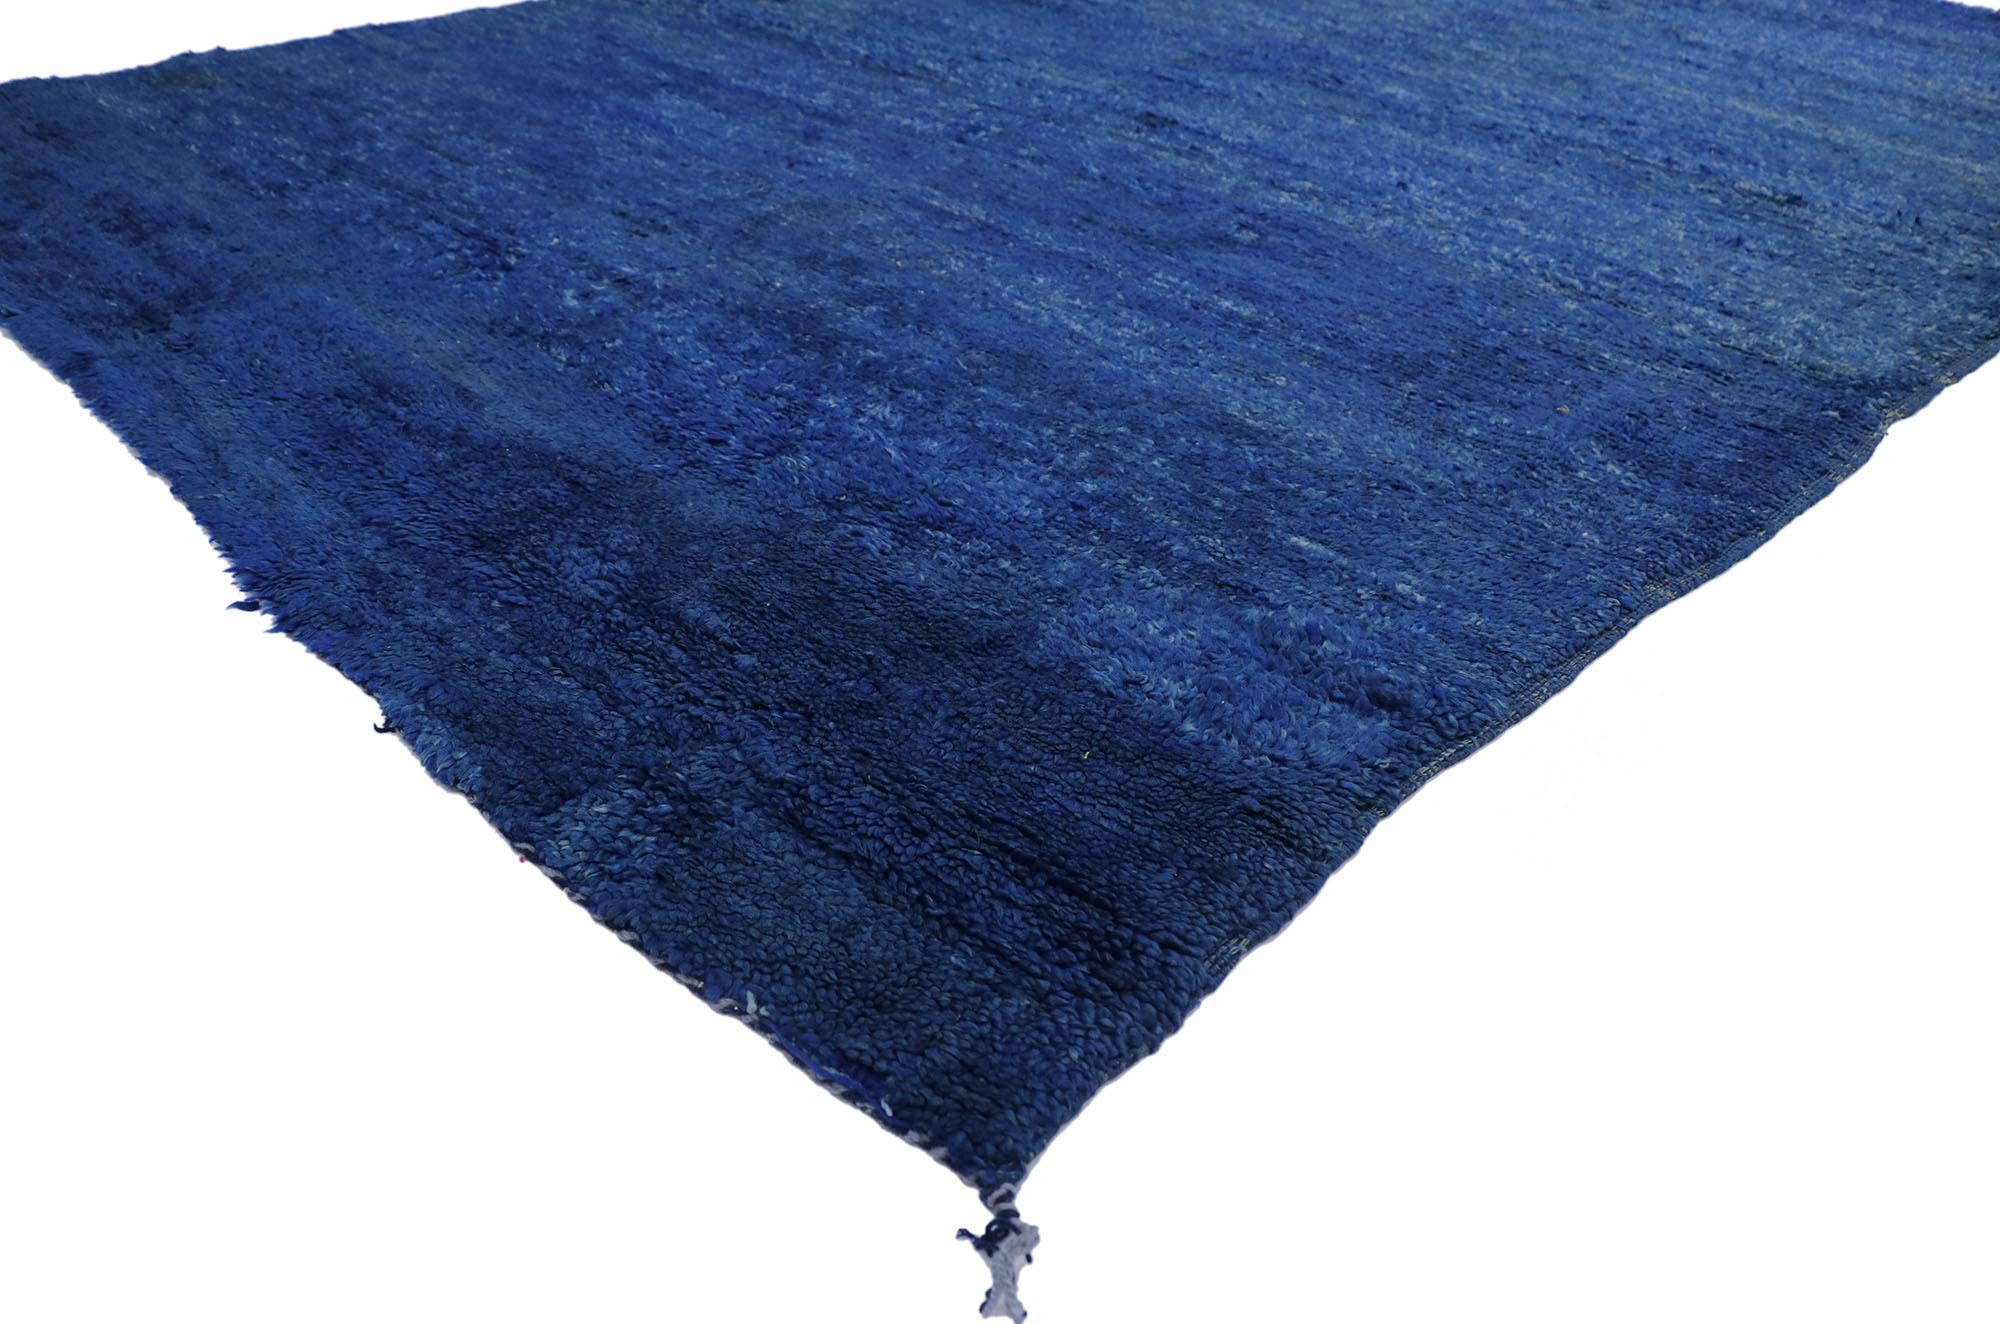 21280 vintage Berber blue Moroccan rug with Modern Boho Chic style 07'00 x 10'02. With its simplicity, plush pile and Bohemian vibes, this hand knotted wool vintage Berber Moroccan rug is a captivating vision of woven beauty. Imbued with blue hues,